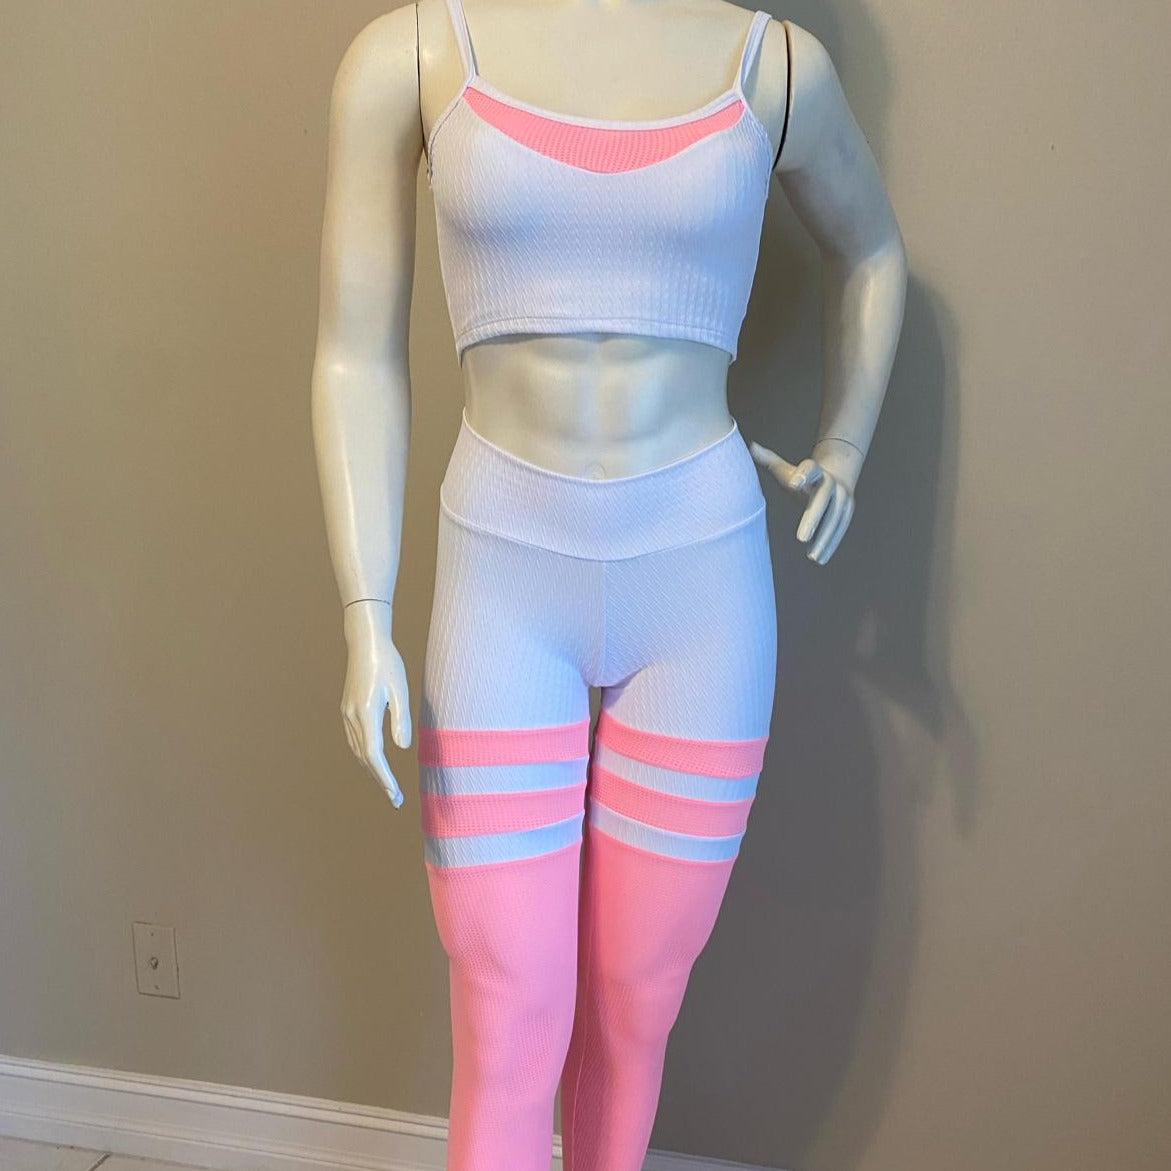 SCRUNCH BOOTY NEW WAVE WHITE AND ROSE LEGGING AND TOP - NO RETURN